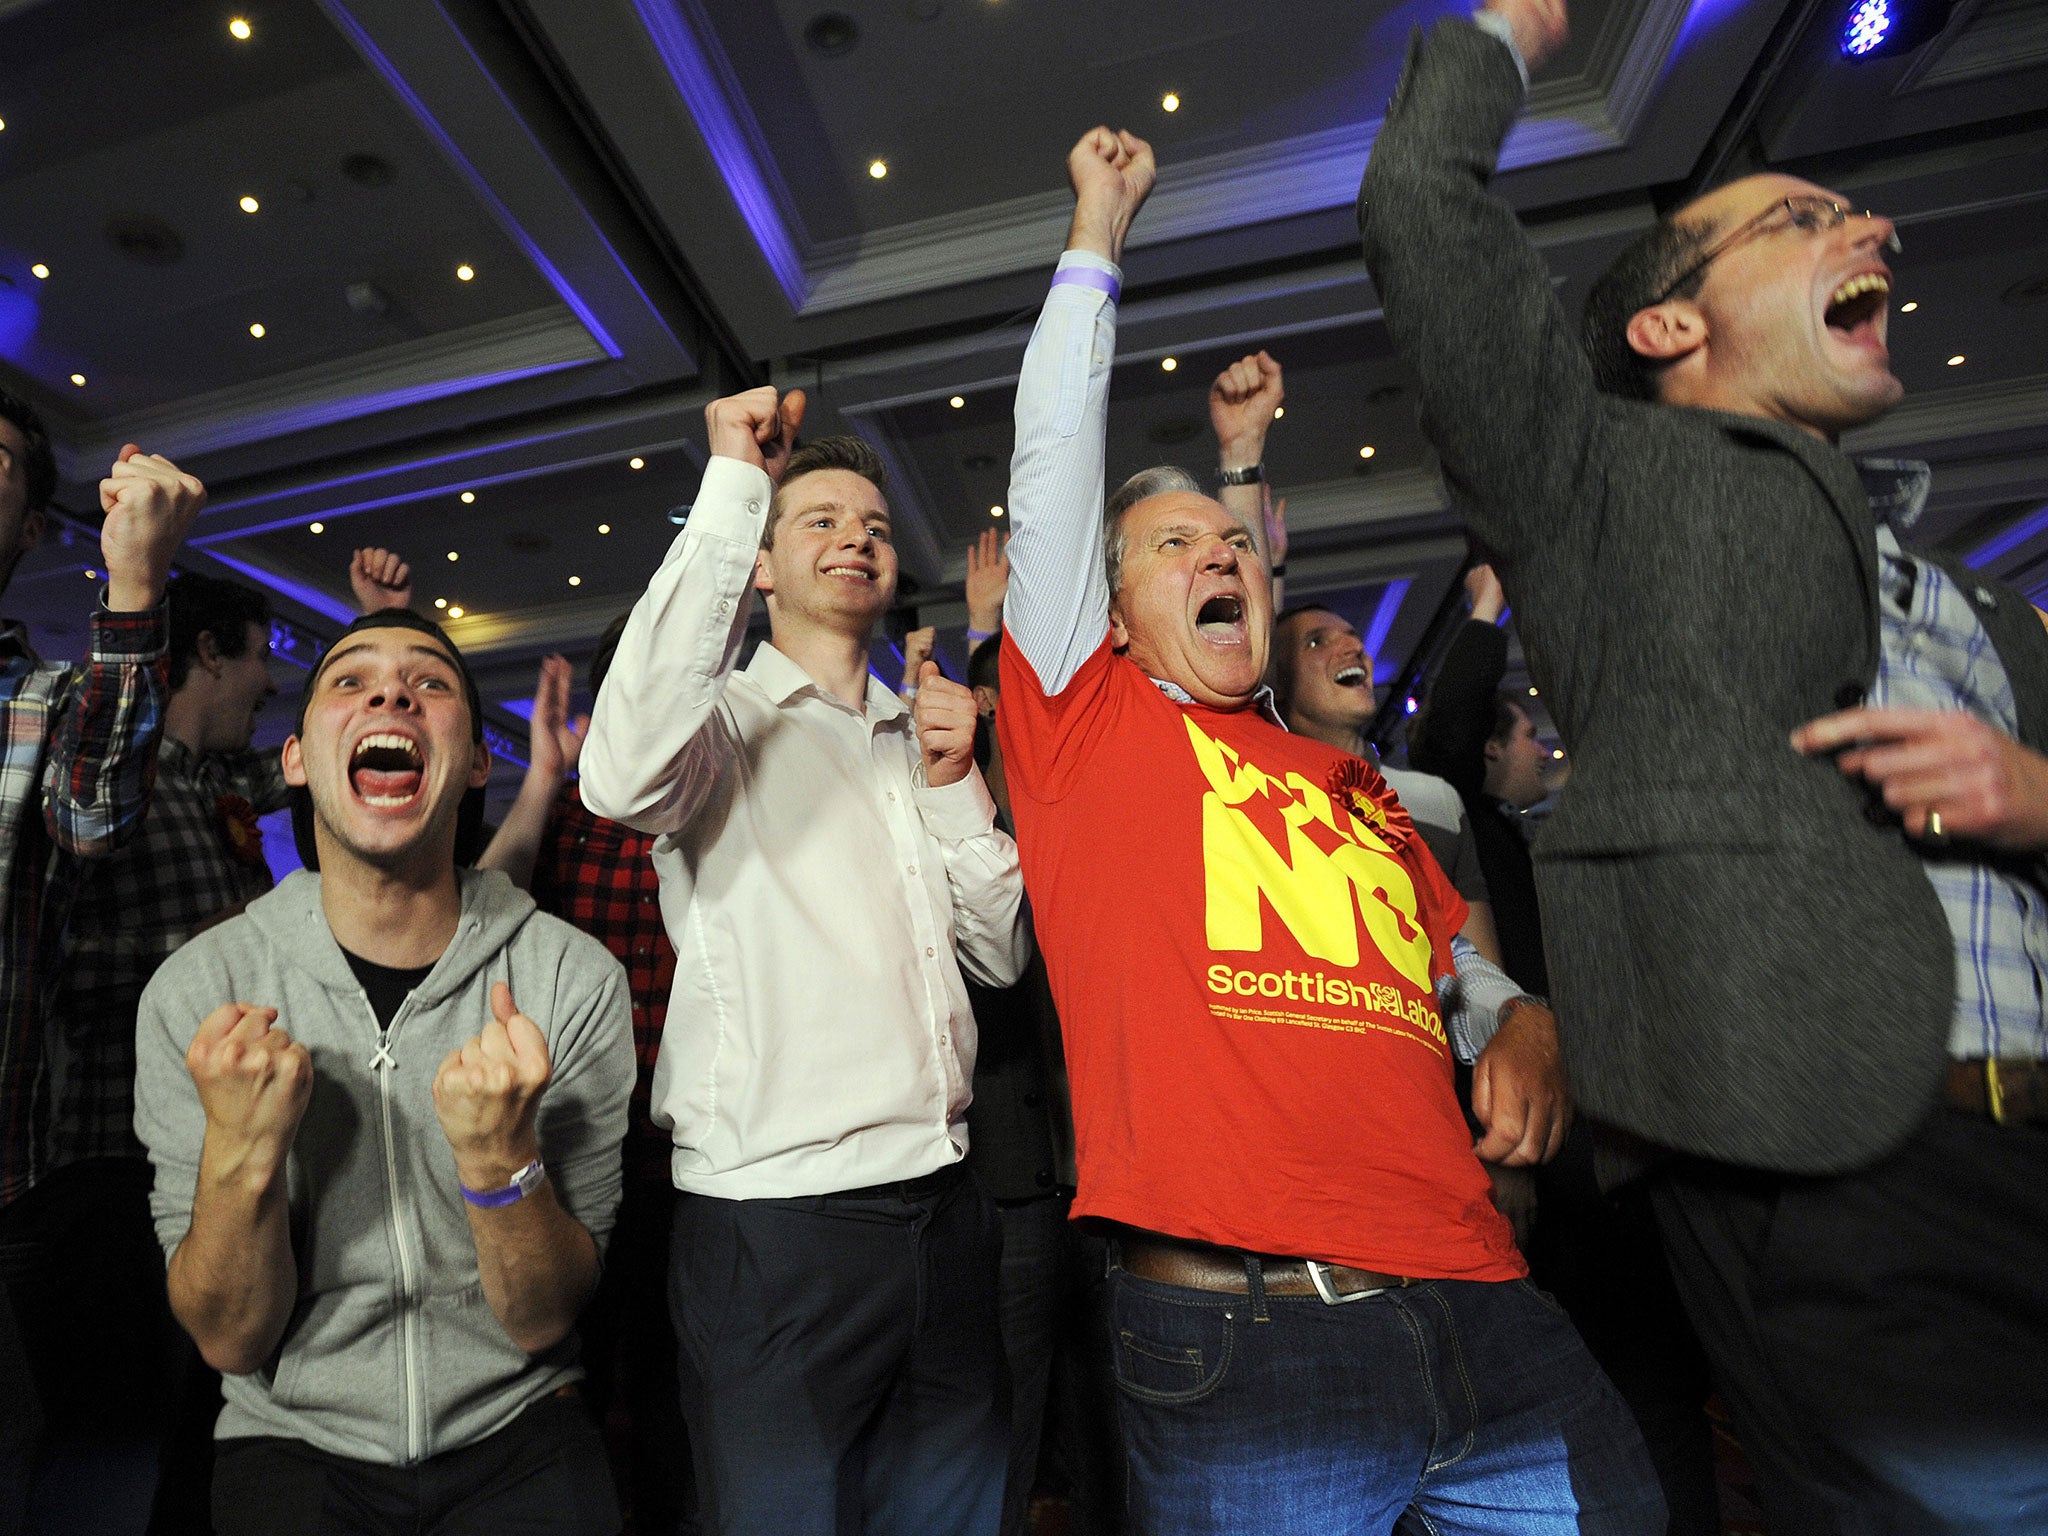 Pro-union supporters react as Scottish independence referendum results come in at a Better Together event in Glasgow